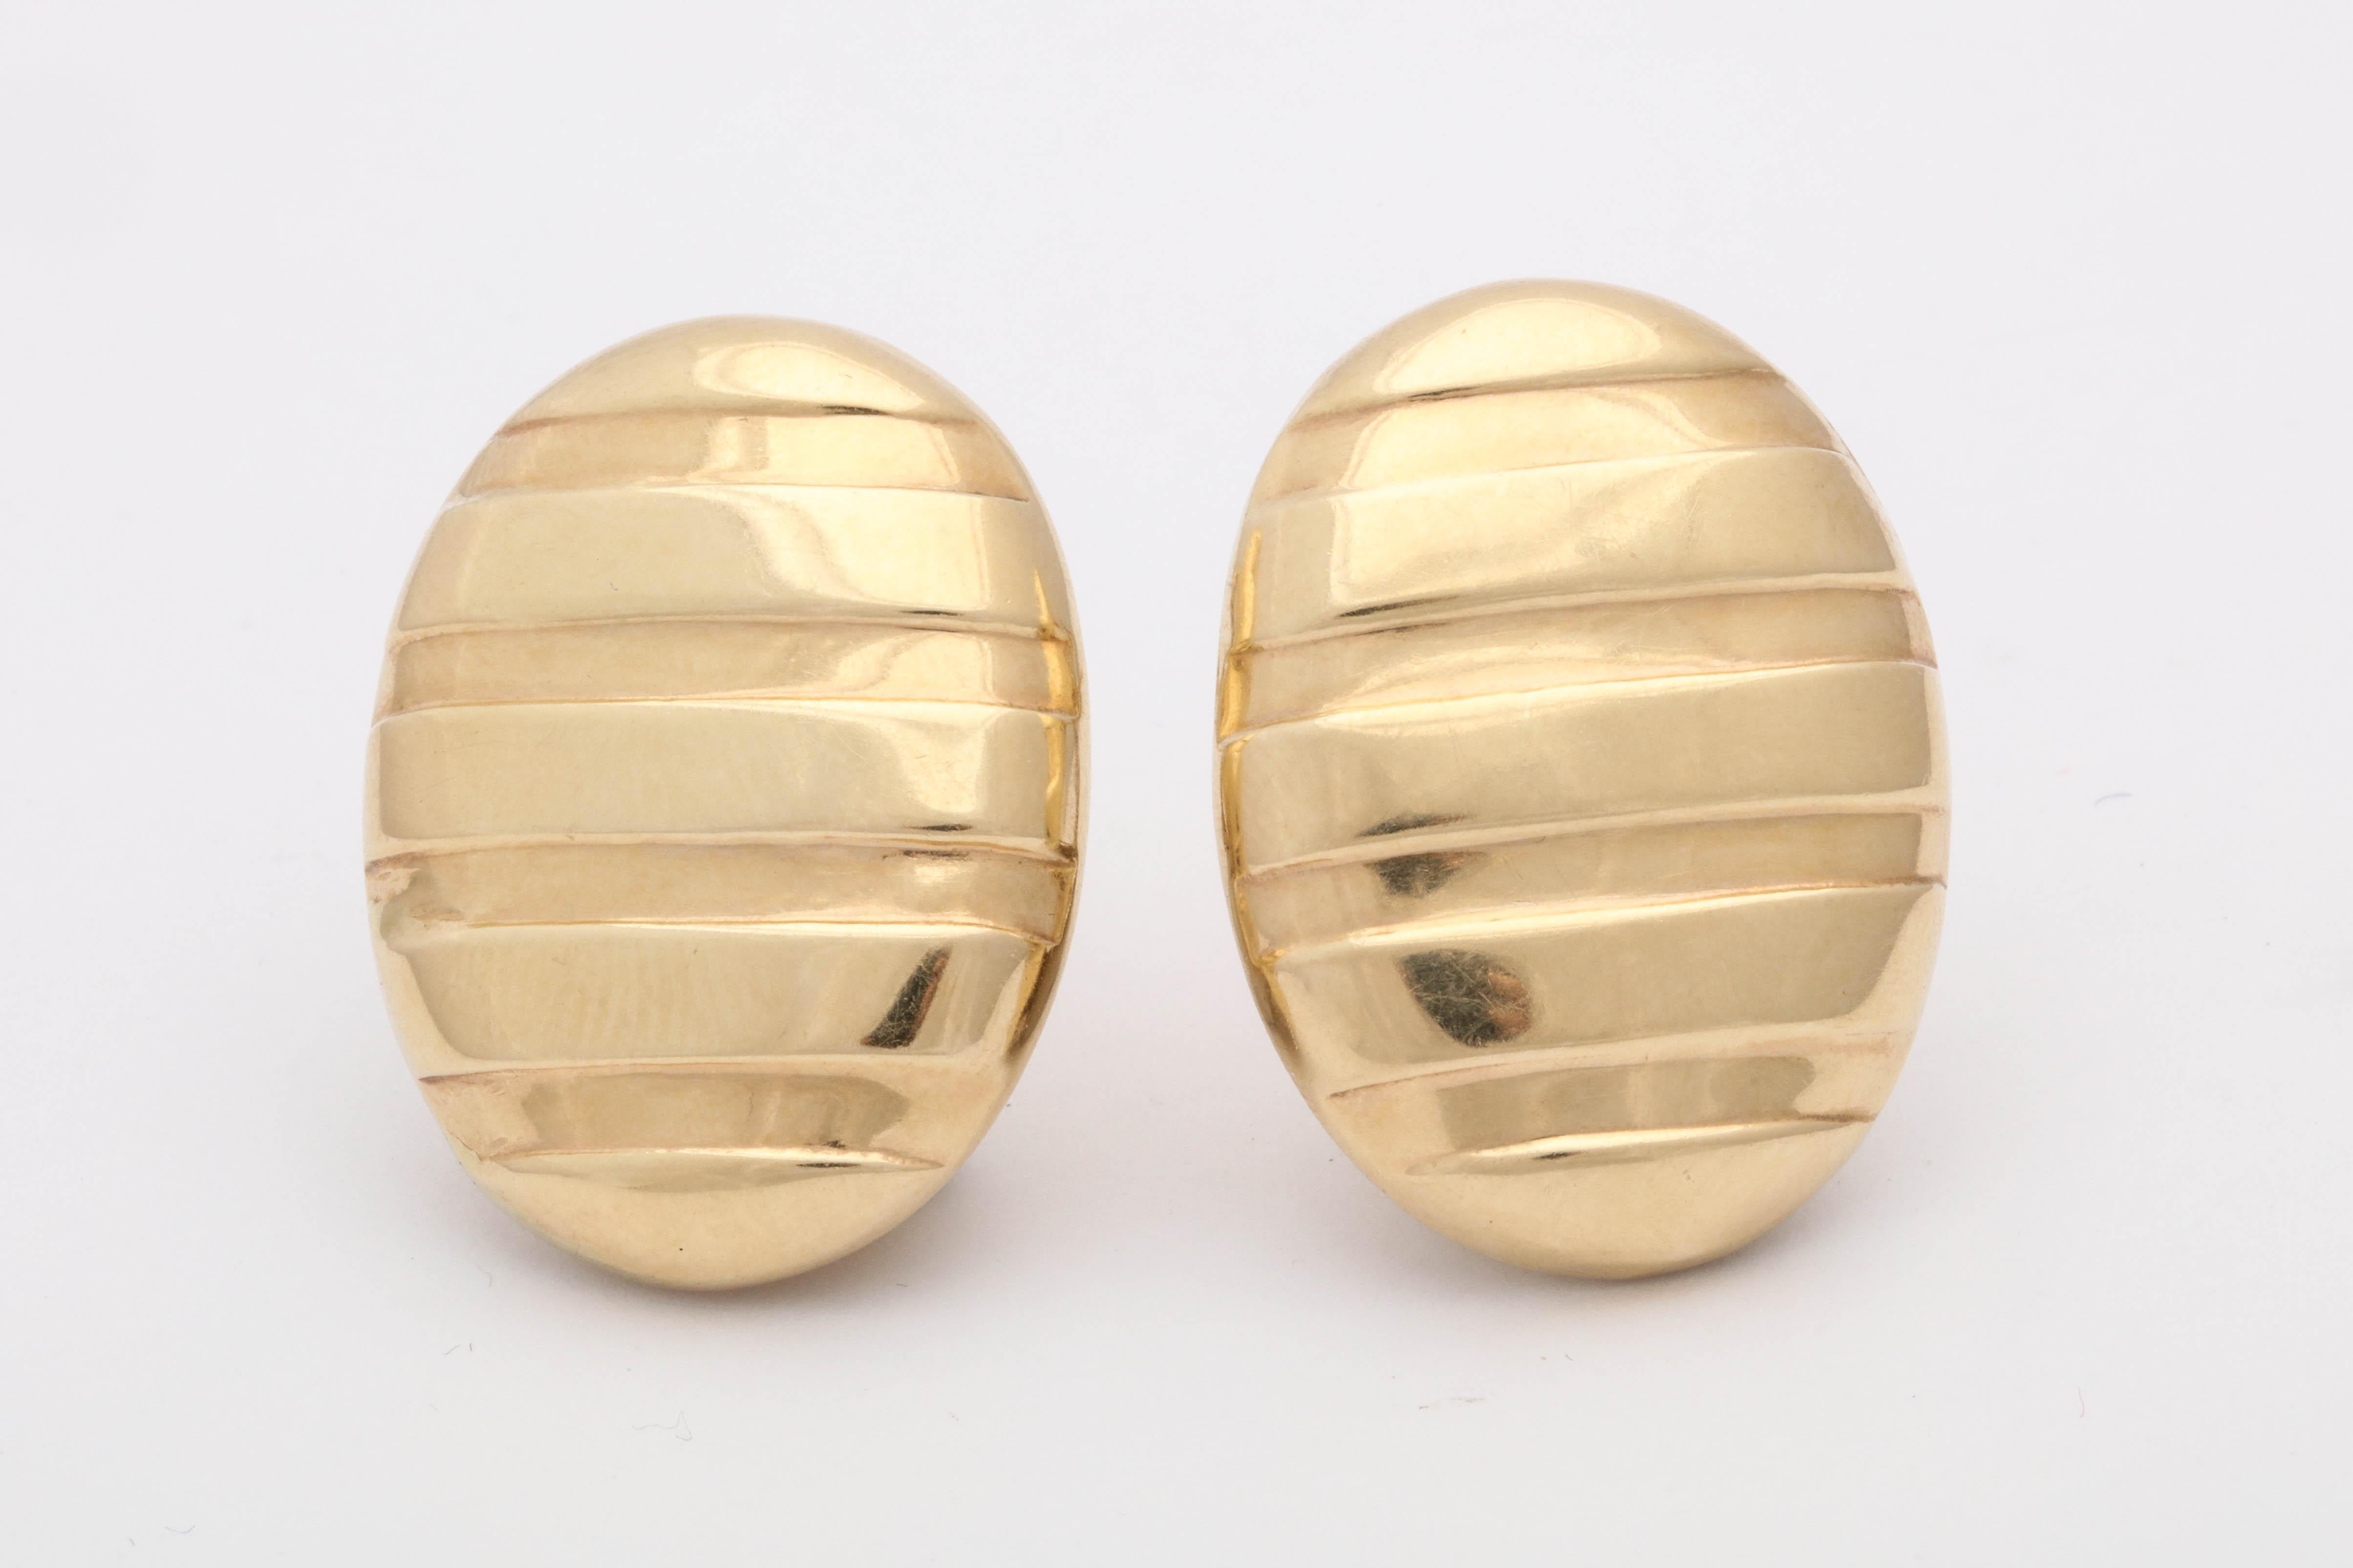 1980s Oval Shaped High Polish Ridged Gold Textured Earclips with Posts 2